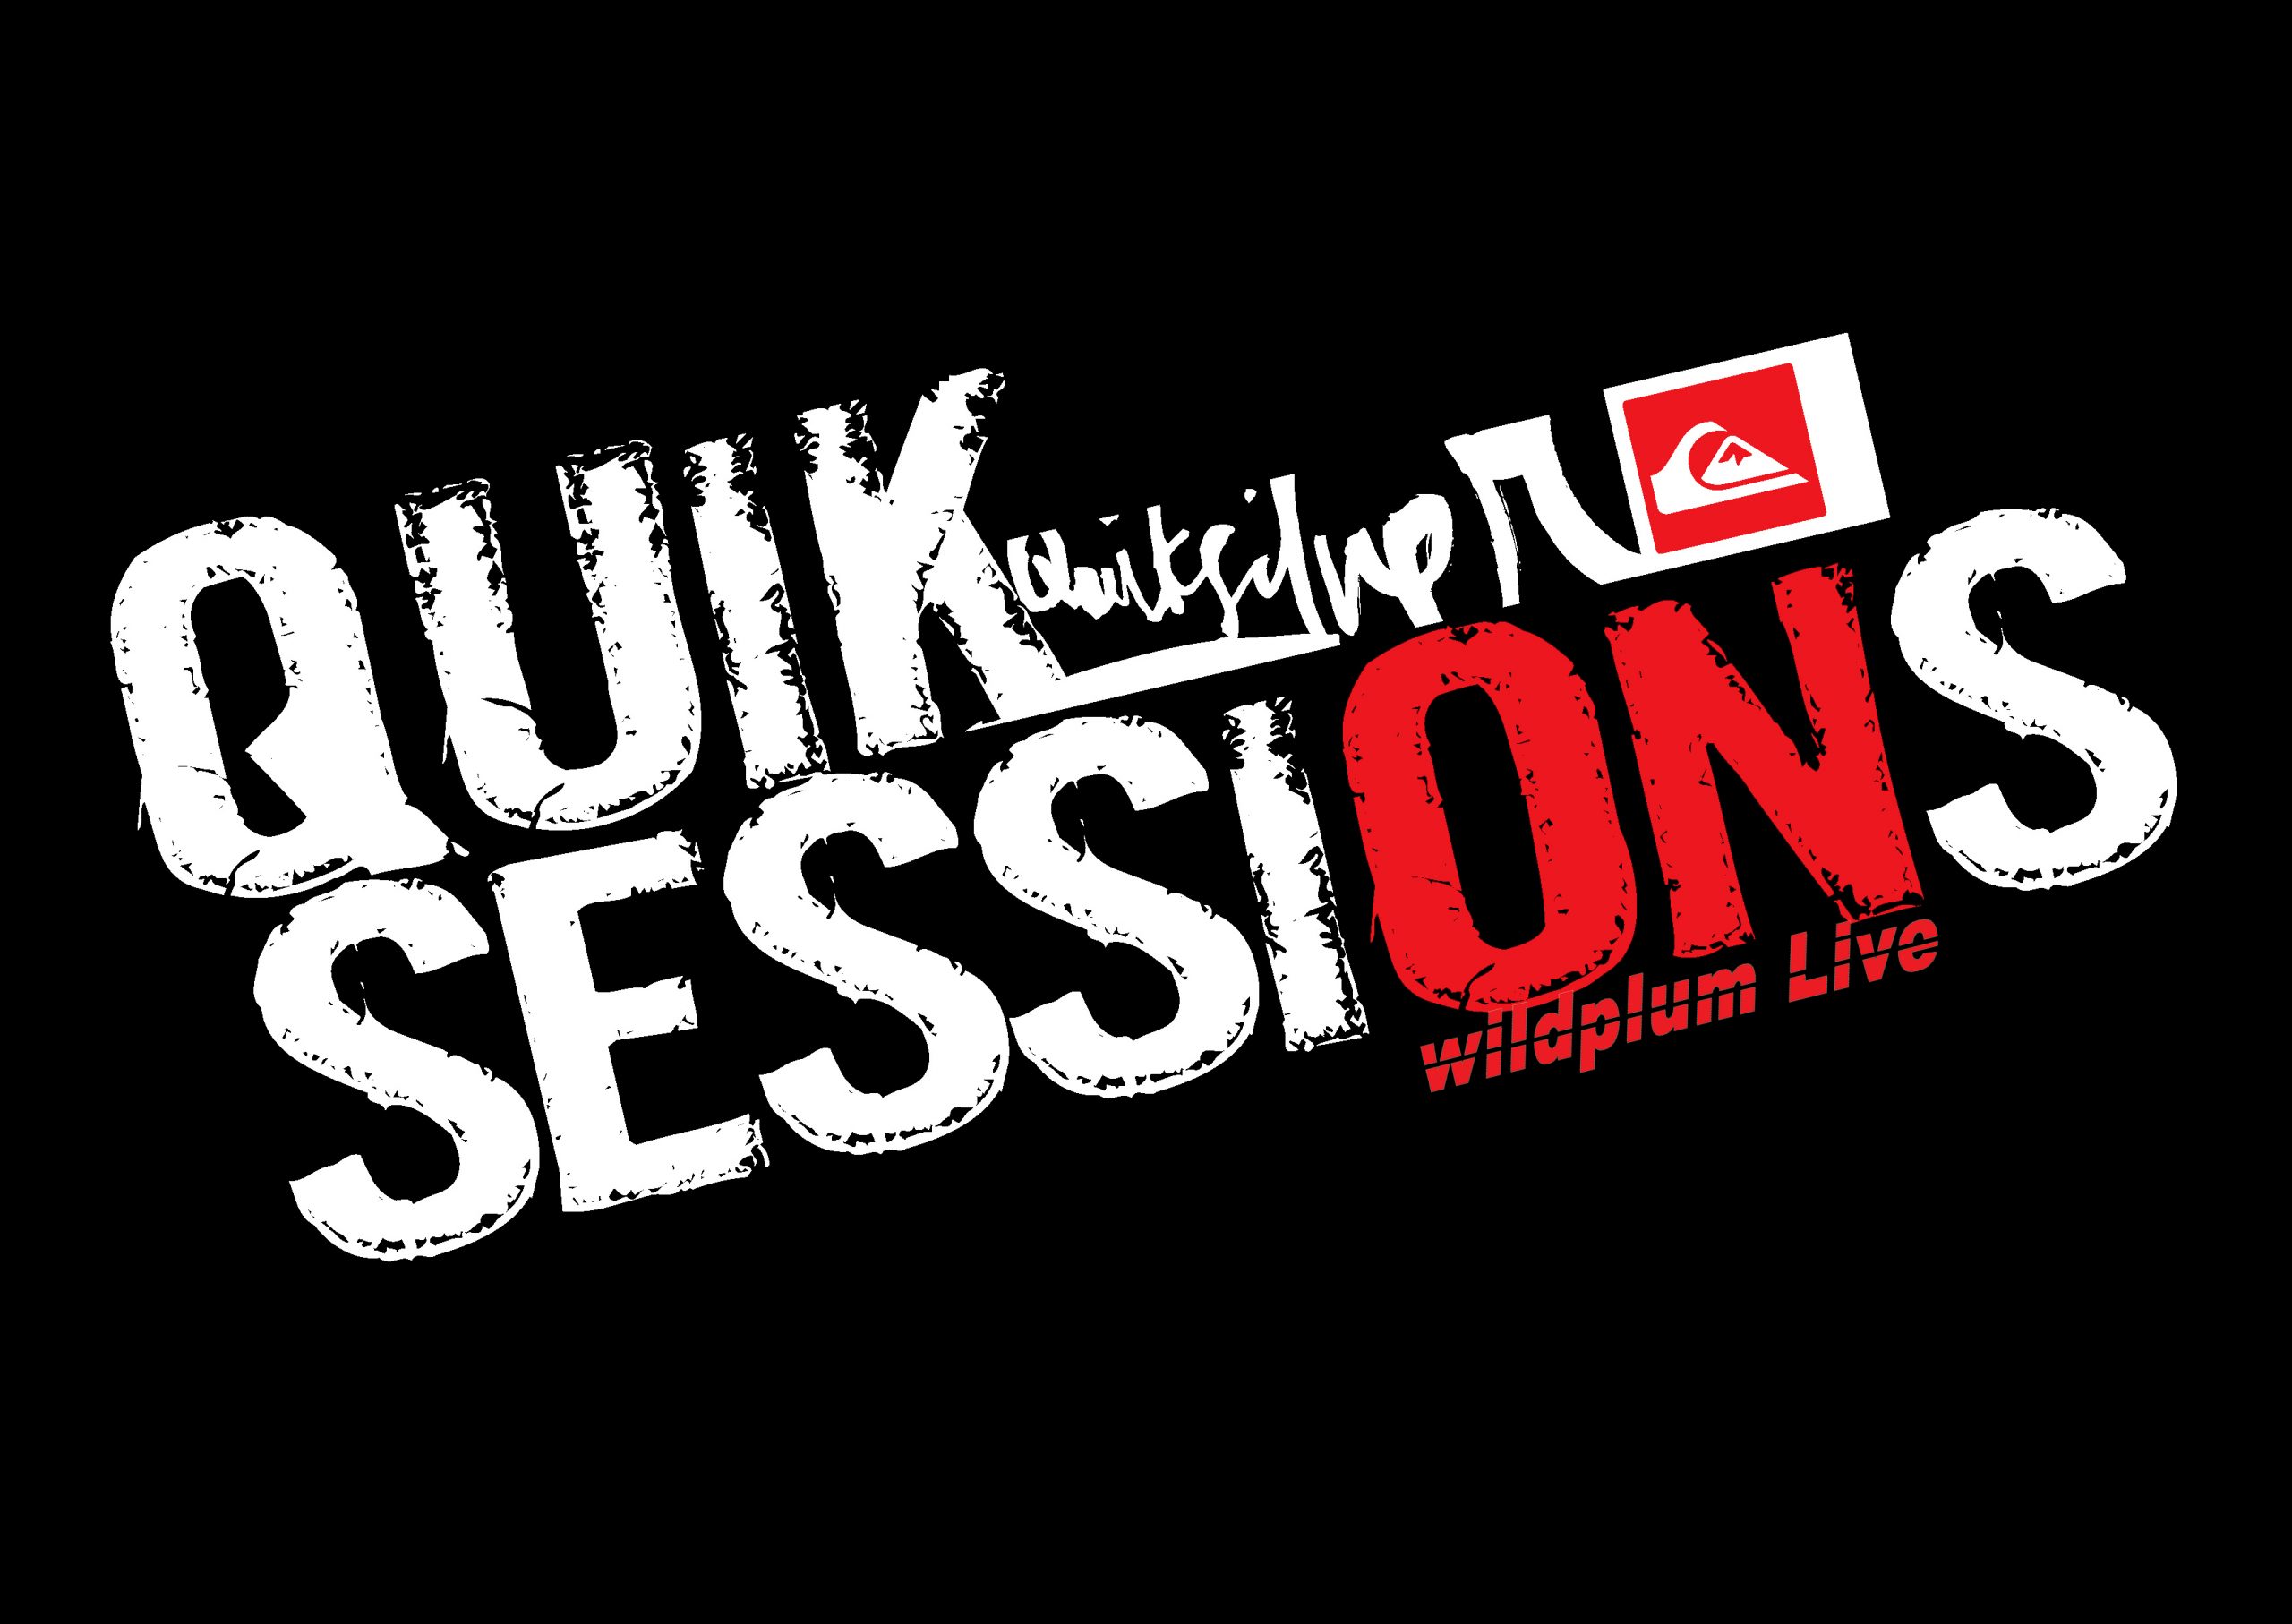 Quiksessions